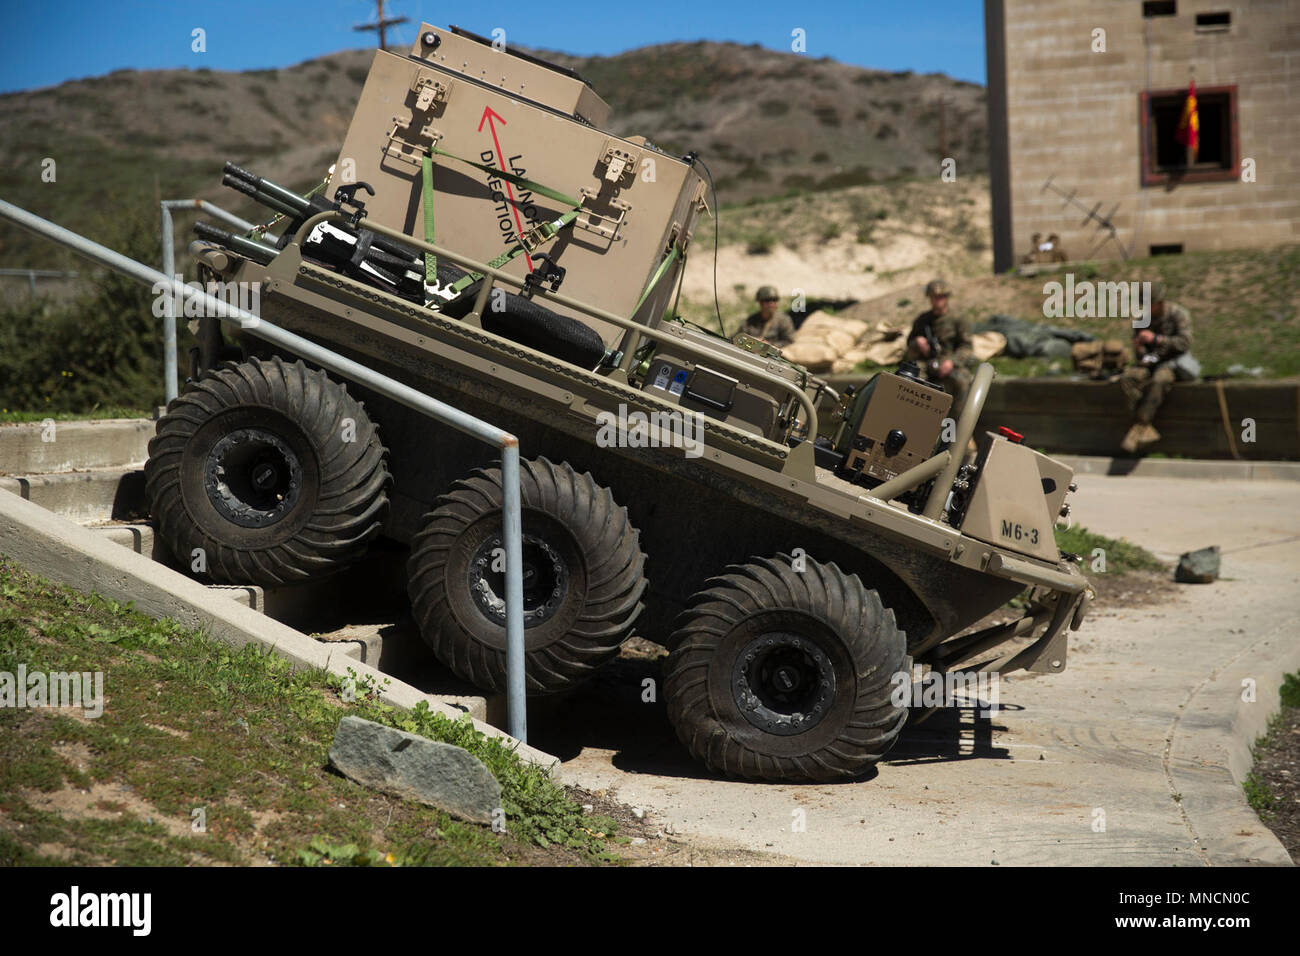 A Multi-Utility Tactical Transport (MUTT) demonstrates its capabilities in a simulated terrain setting during the Urban Advanced Naval Technologies Exercise 18 (ANTX18) on Camp Pendleton, Calif., March 19, 2018. ANTX18 is an innovative approach to concept of operations and capability development that integrates engineers, technologists and operators into a dynamic development team. (U.S. Marine Corps Stock Photo